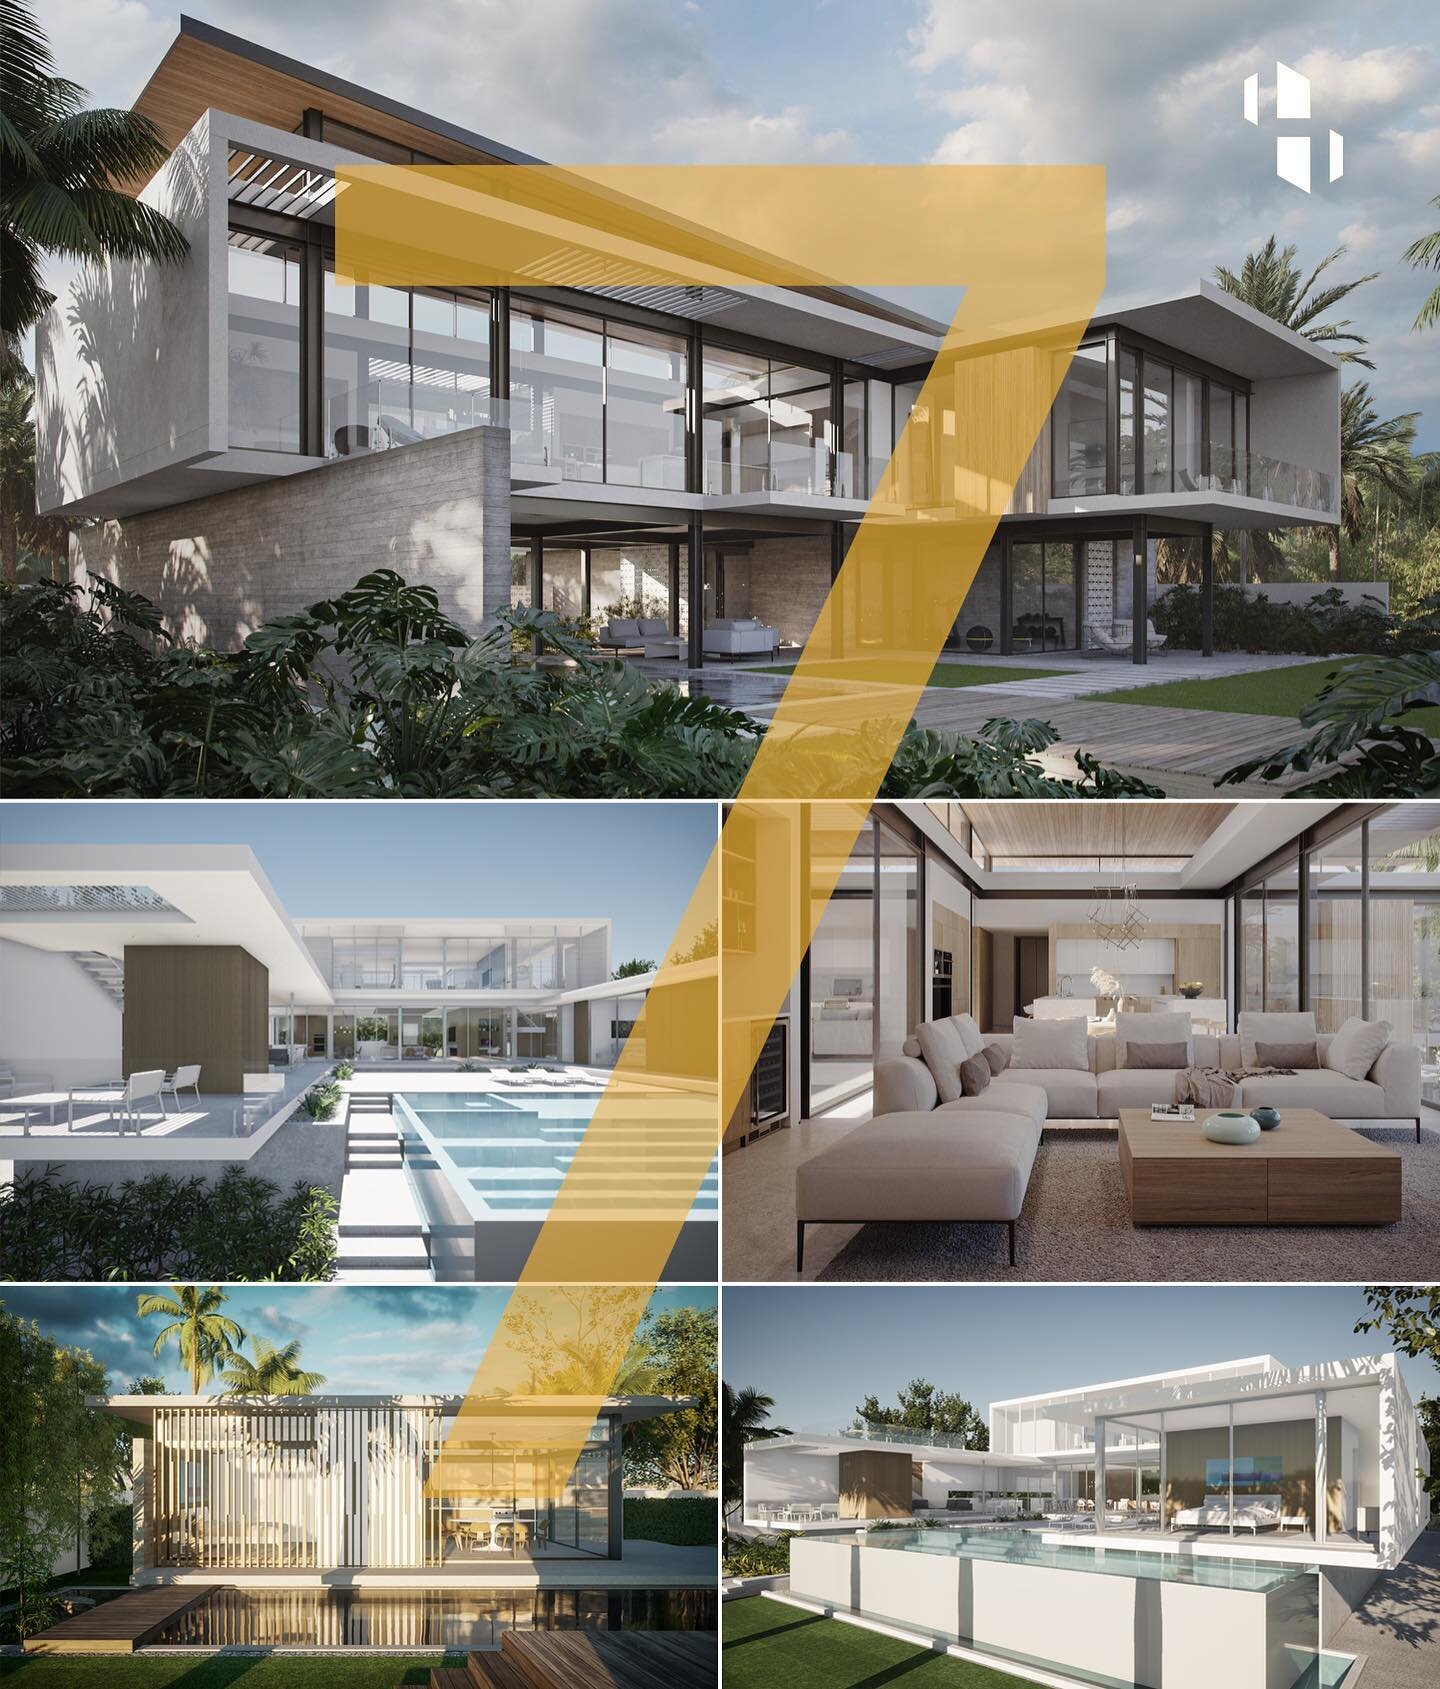 This month marks our 7th year anniversary at hive architects. We want to thank our clients, consultants, friends and family for their continued support. The past year has been quite productive at hive with several projects ready for permit. The equa 